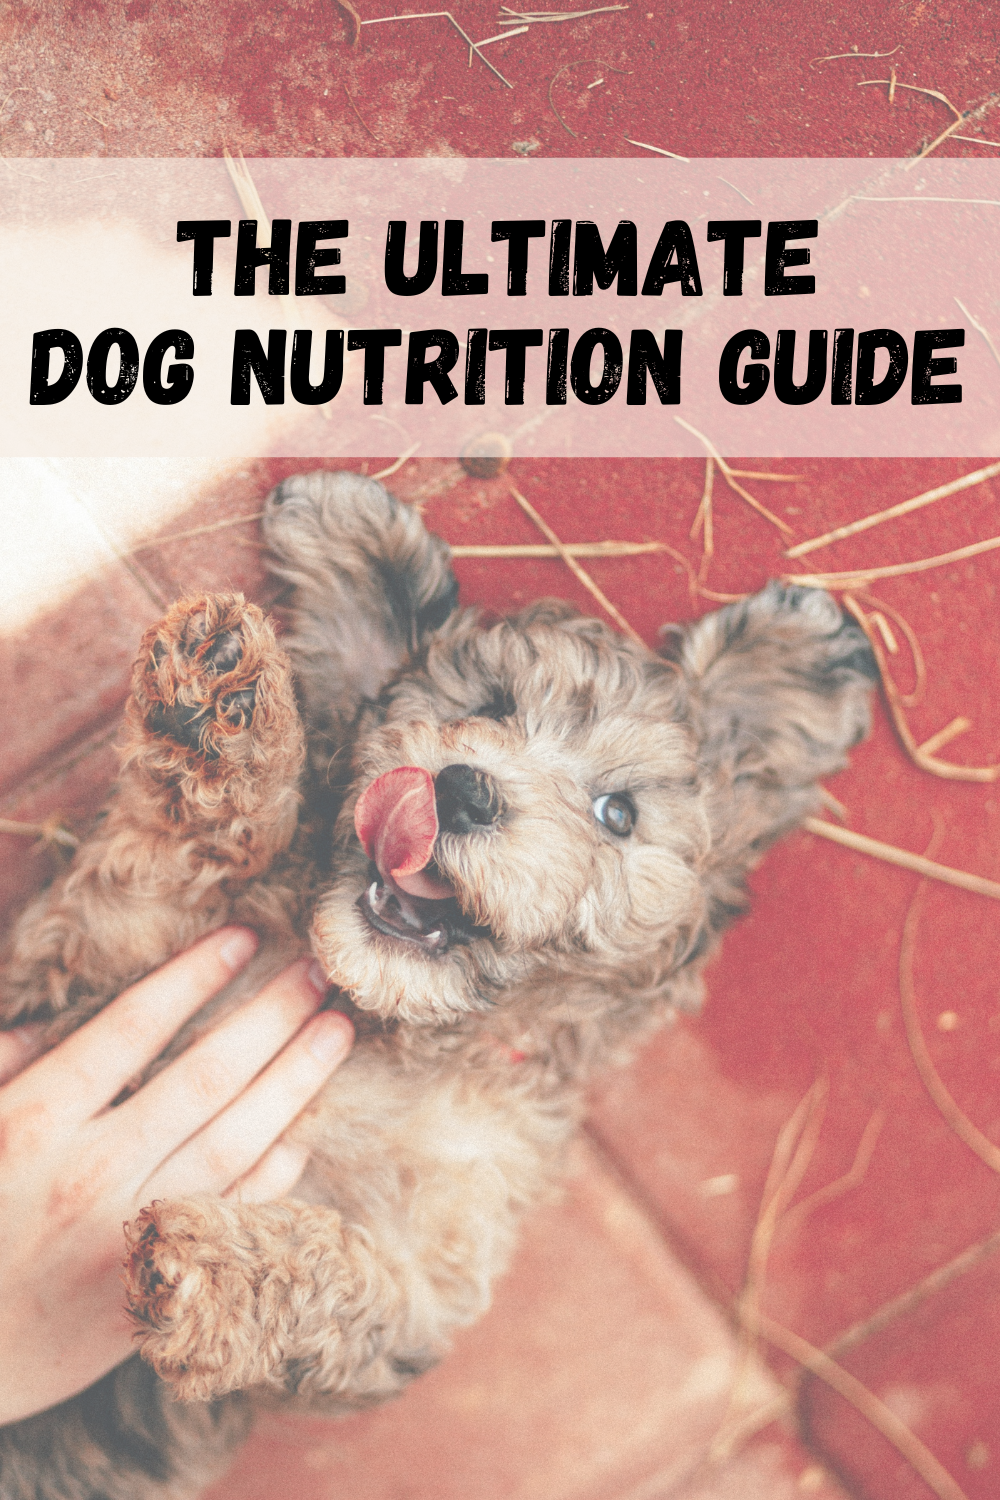 Dog nutrition guide